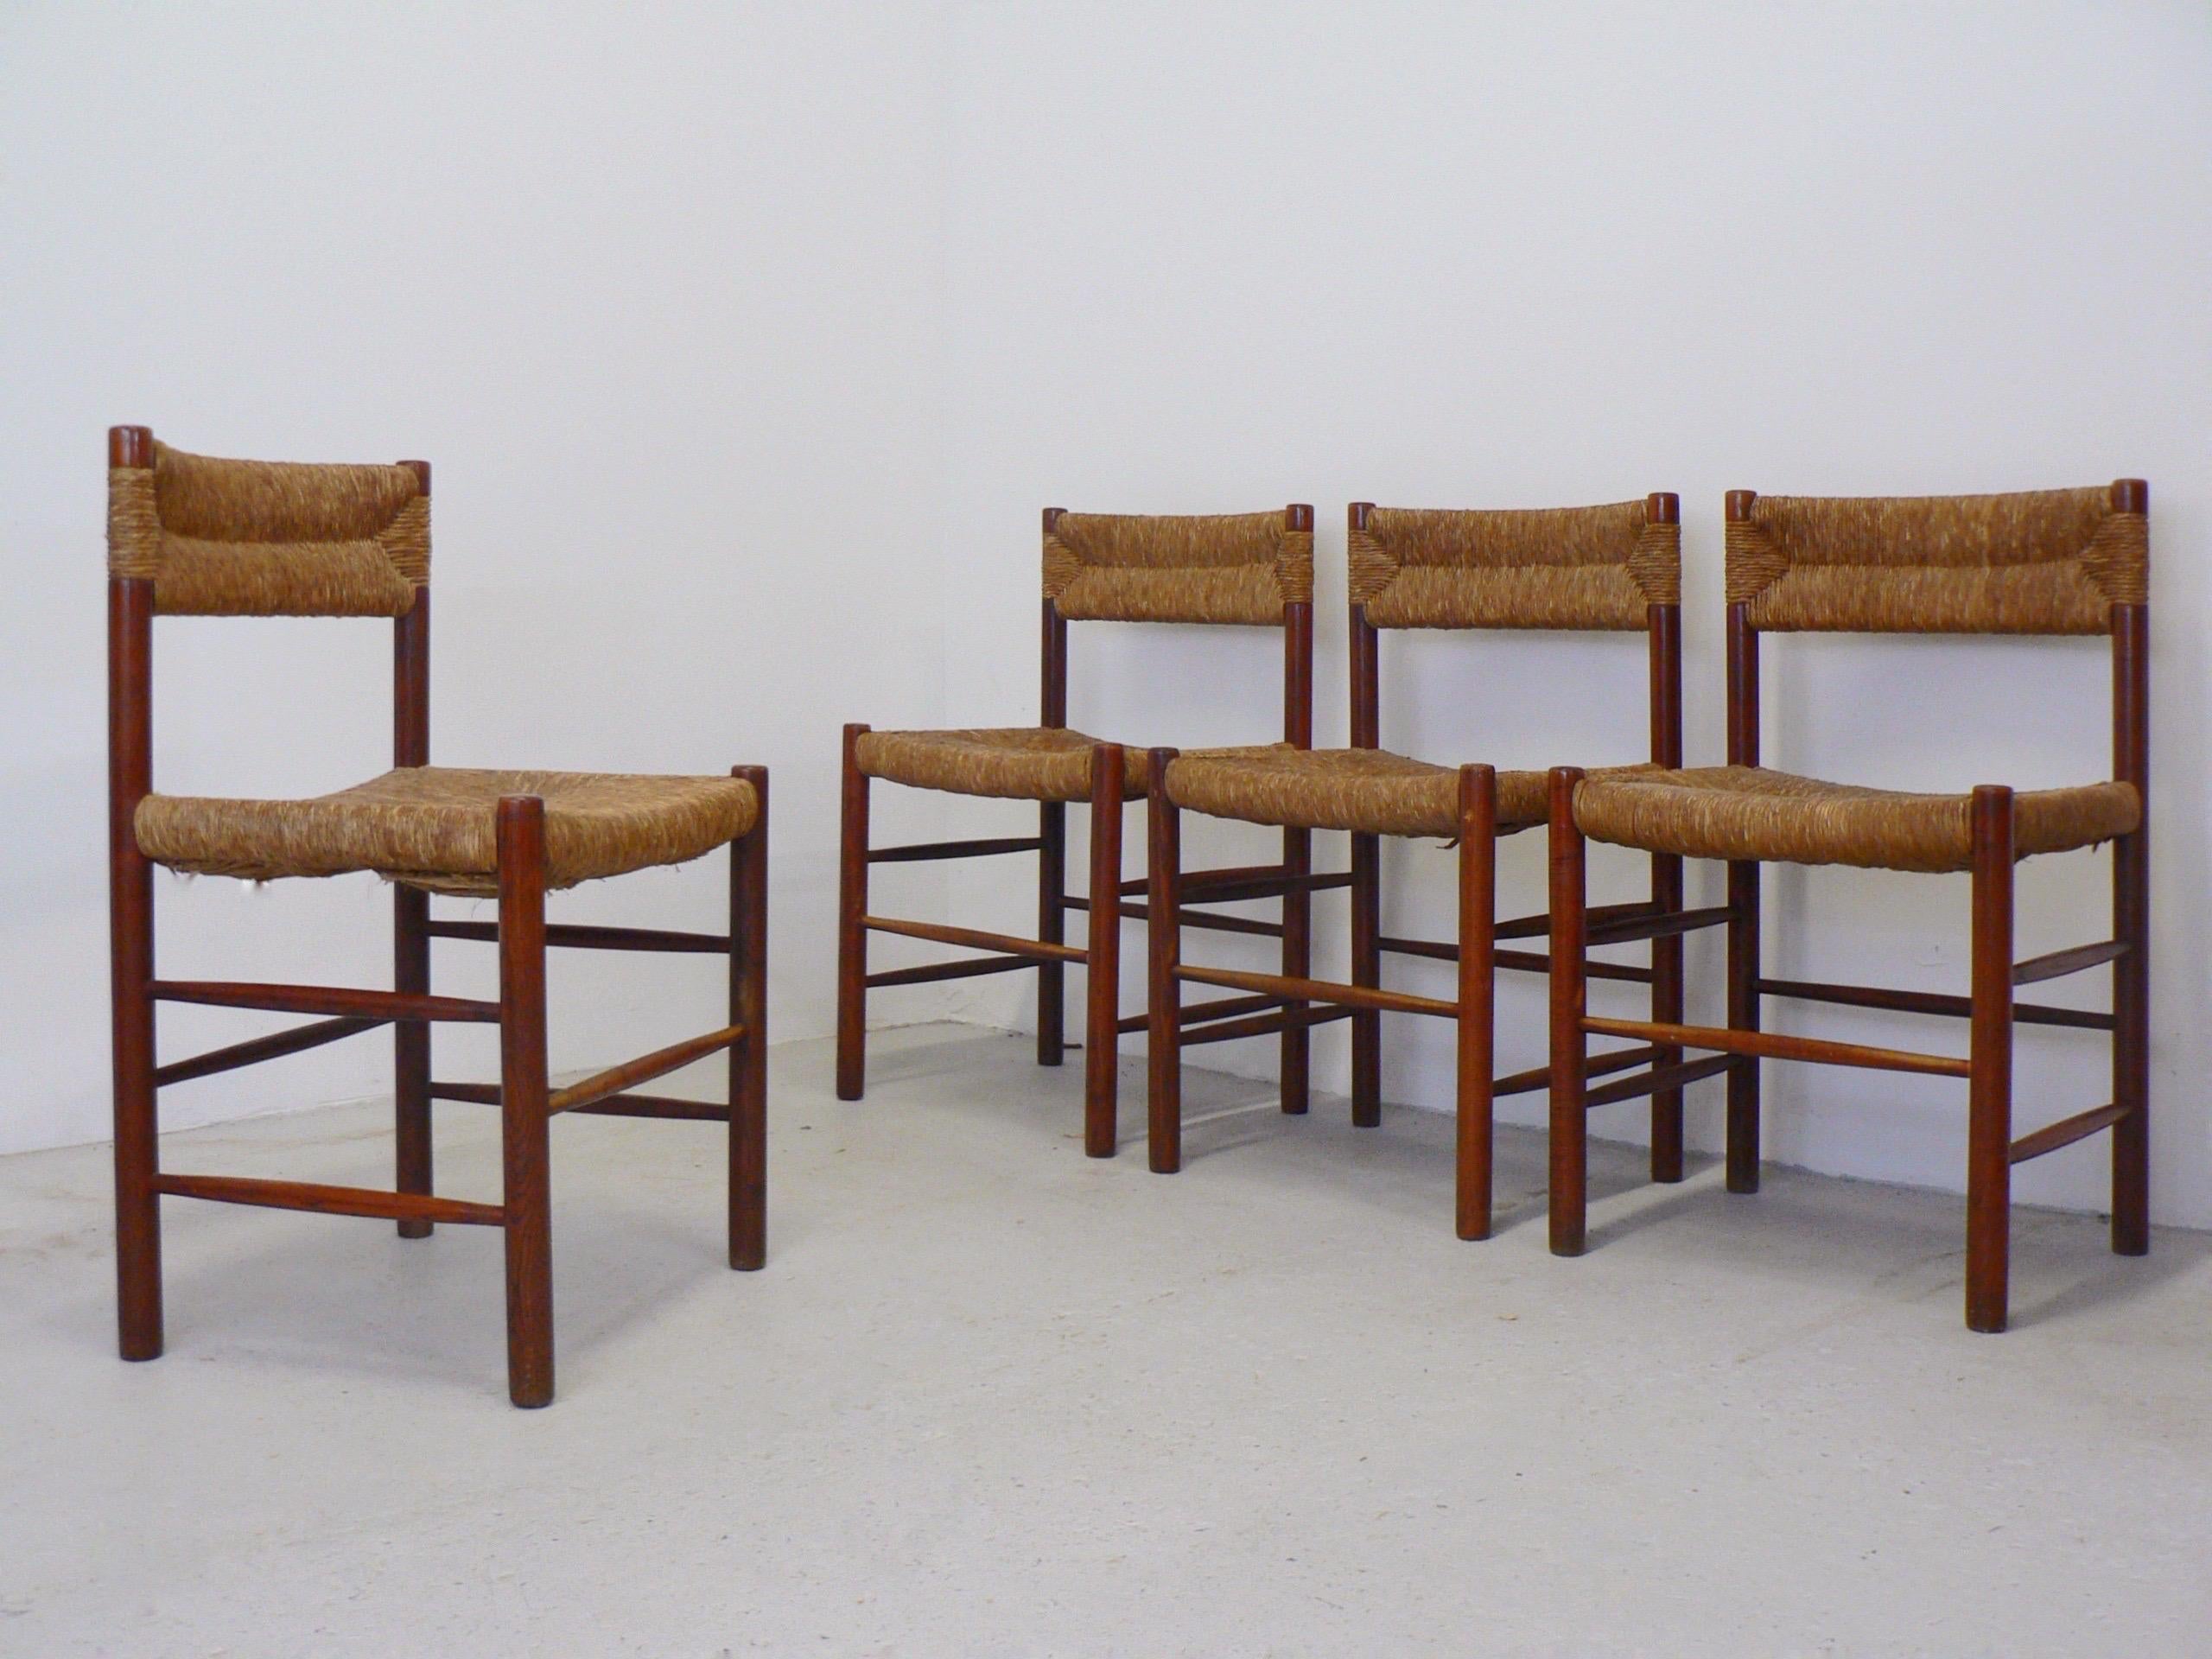 French 4 Robert Sentou Dordogne Chairs for Charlotte Perriand - 1950